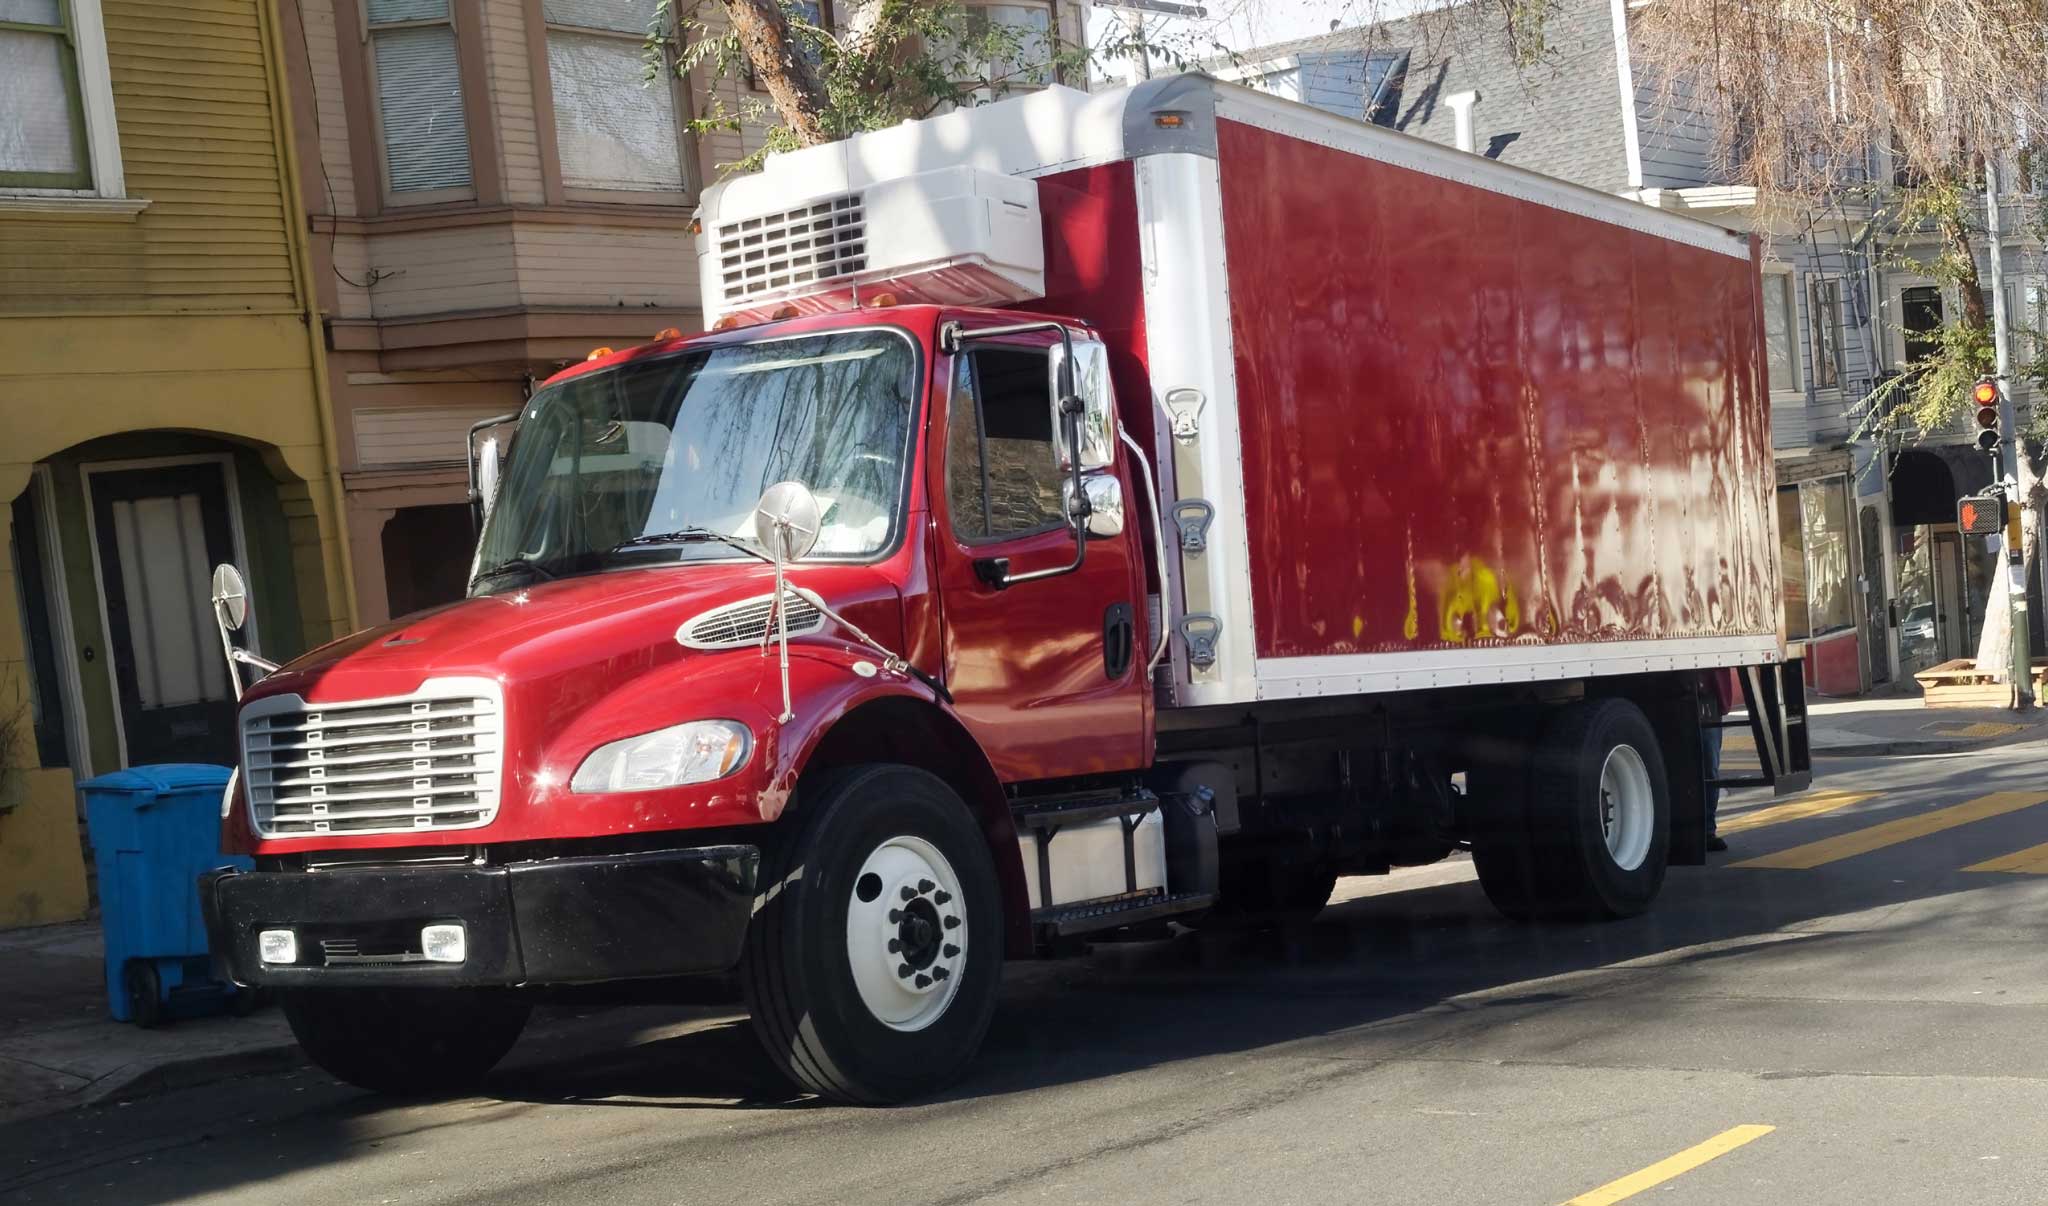 Front and side view of shiny red refrigerated delivery truck park in urban neighborhood.